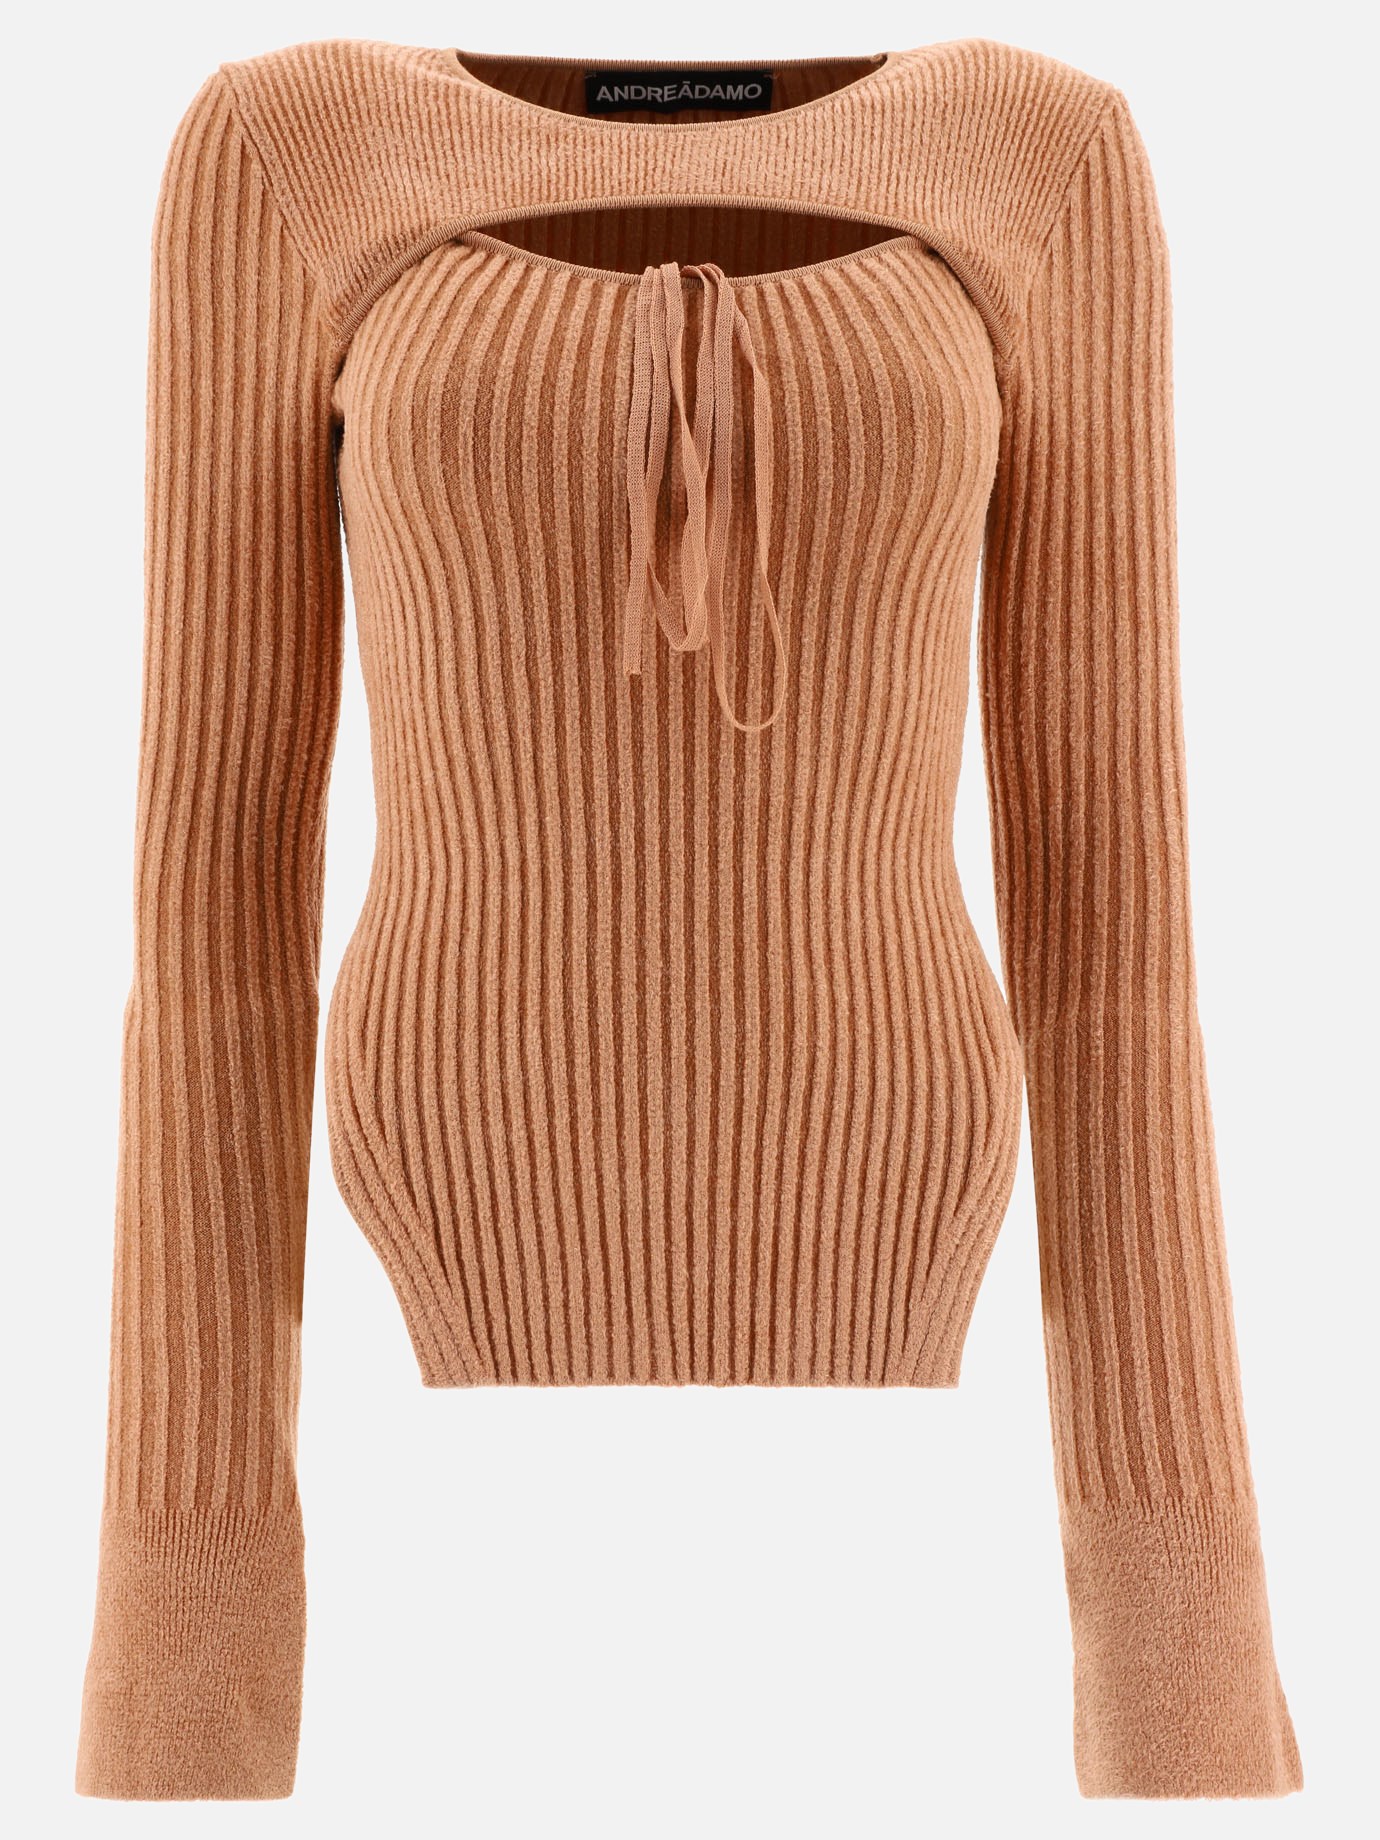 Corduroy cut-out sweaterby Andreadamo - 1